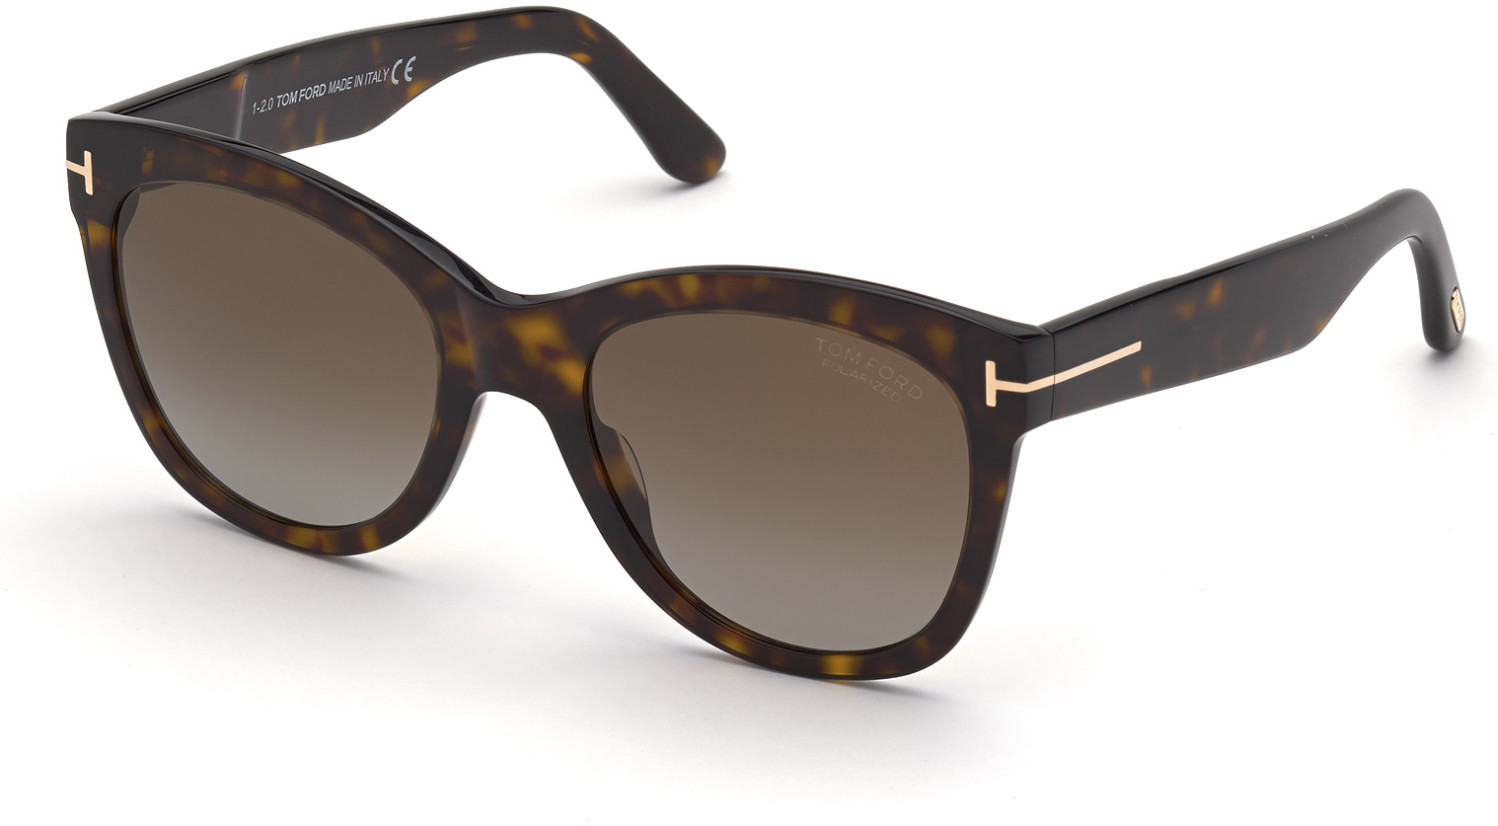 TOM FORD 0870-F WALLACE 52H